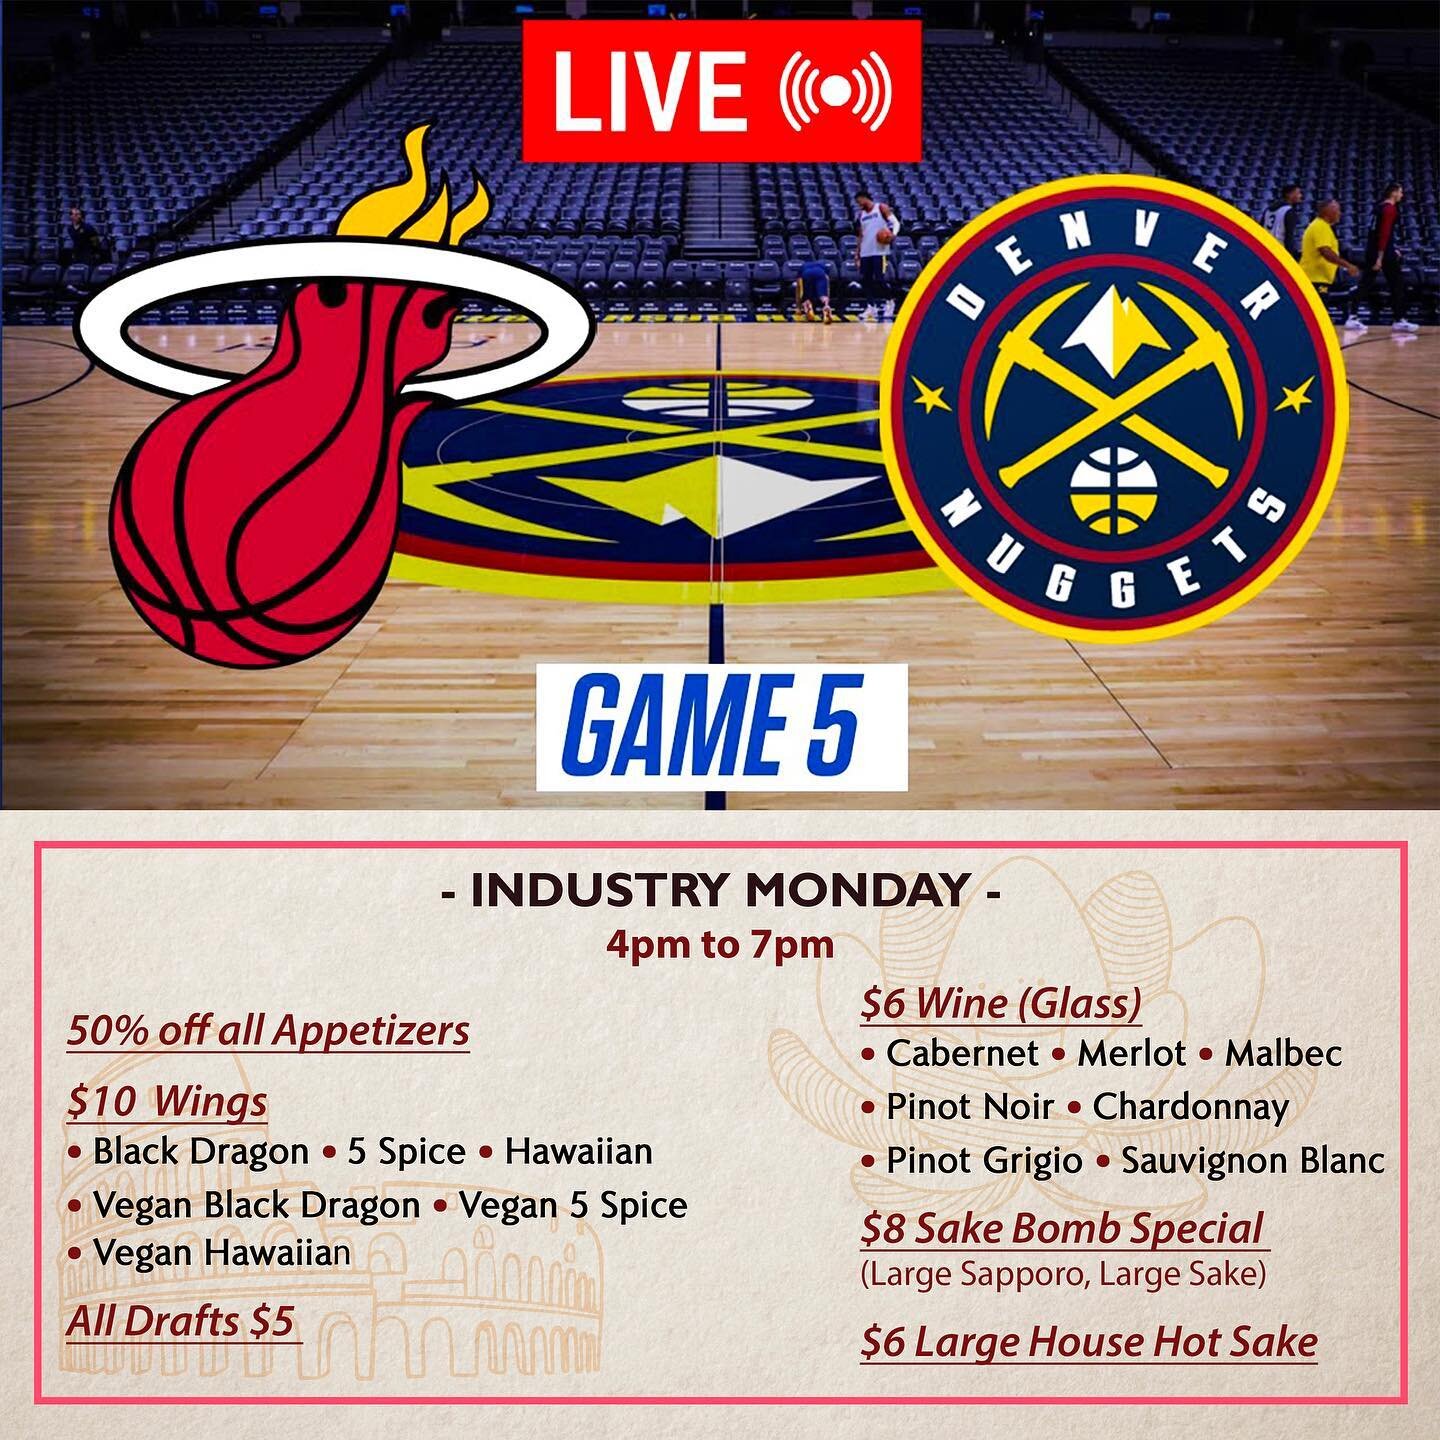 We will be showing game 5 on our projector &amp; big screen at 5:30pm AND we have a lot of specials going on! Come hang. 🏀🔥⛏️🍣🍕🍶🍺
.
.
.
#cinkuni #northparksandiego #nbafinals #bigscreen #appetizers #wings #chickenwings #sushi #sushiaddict #supp